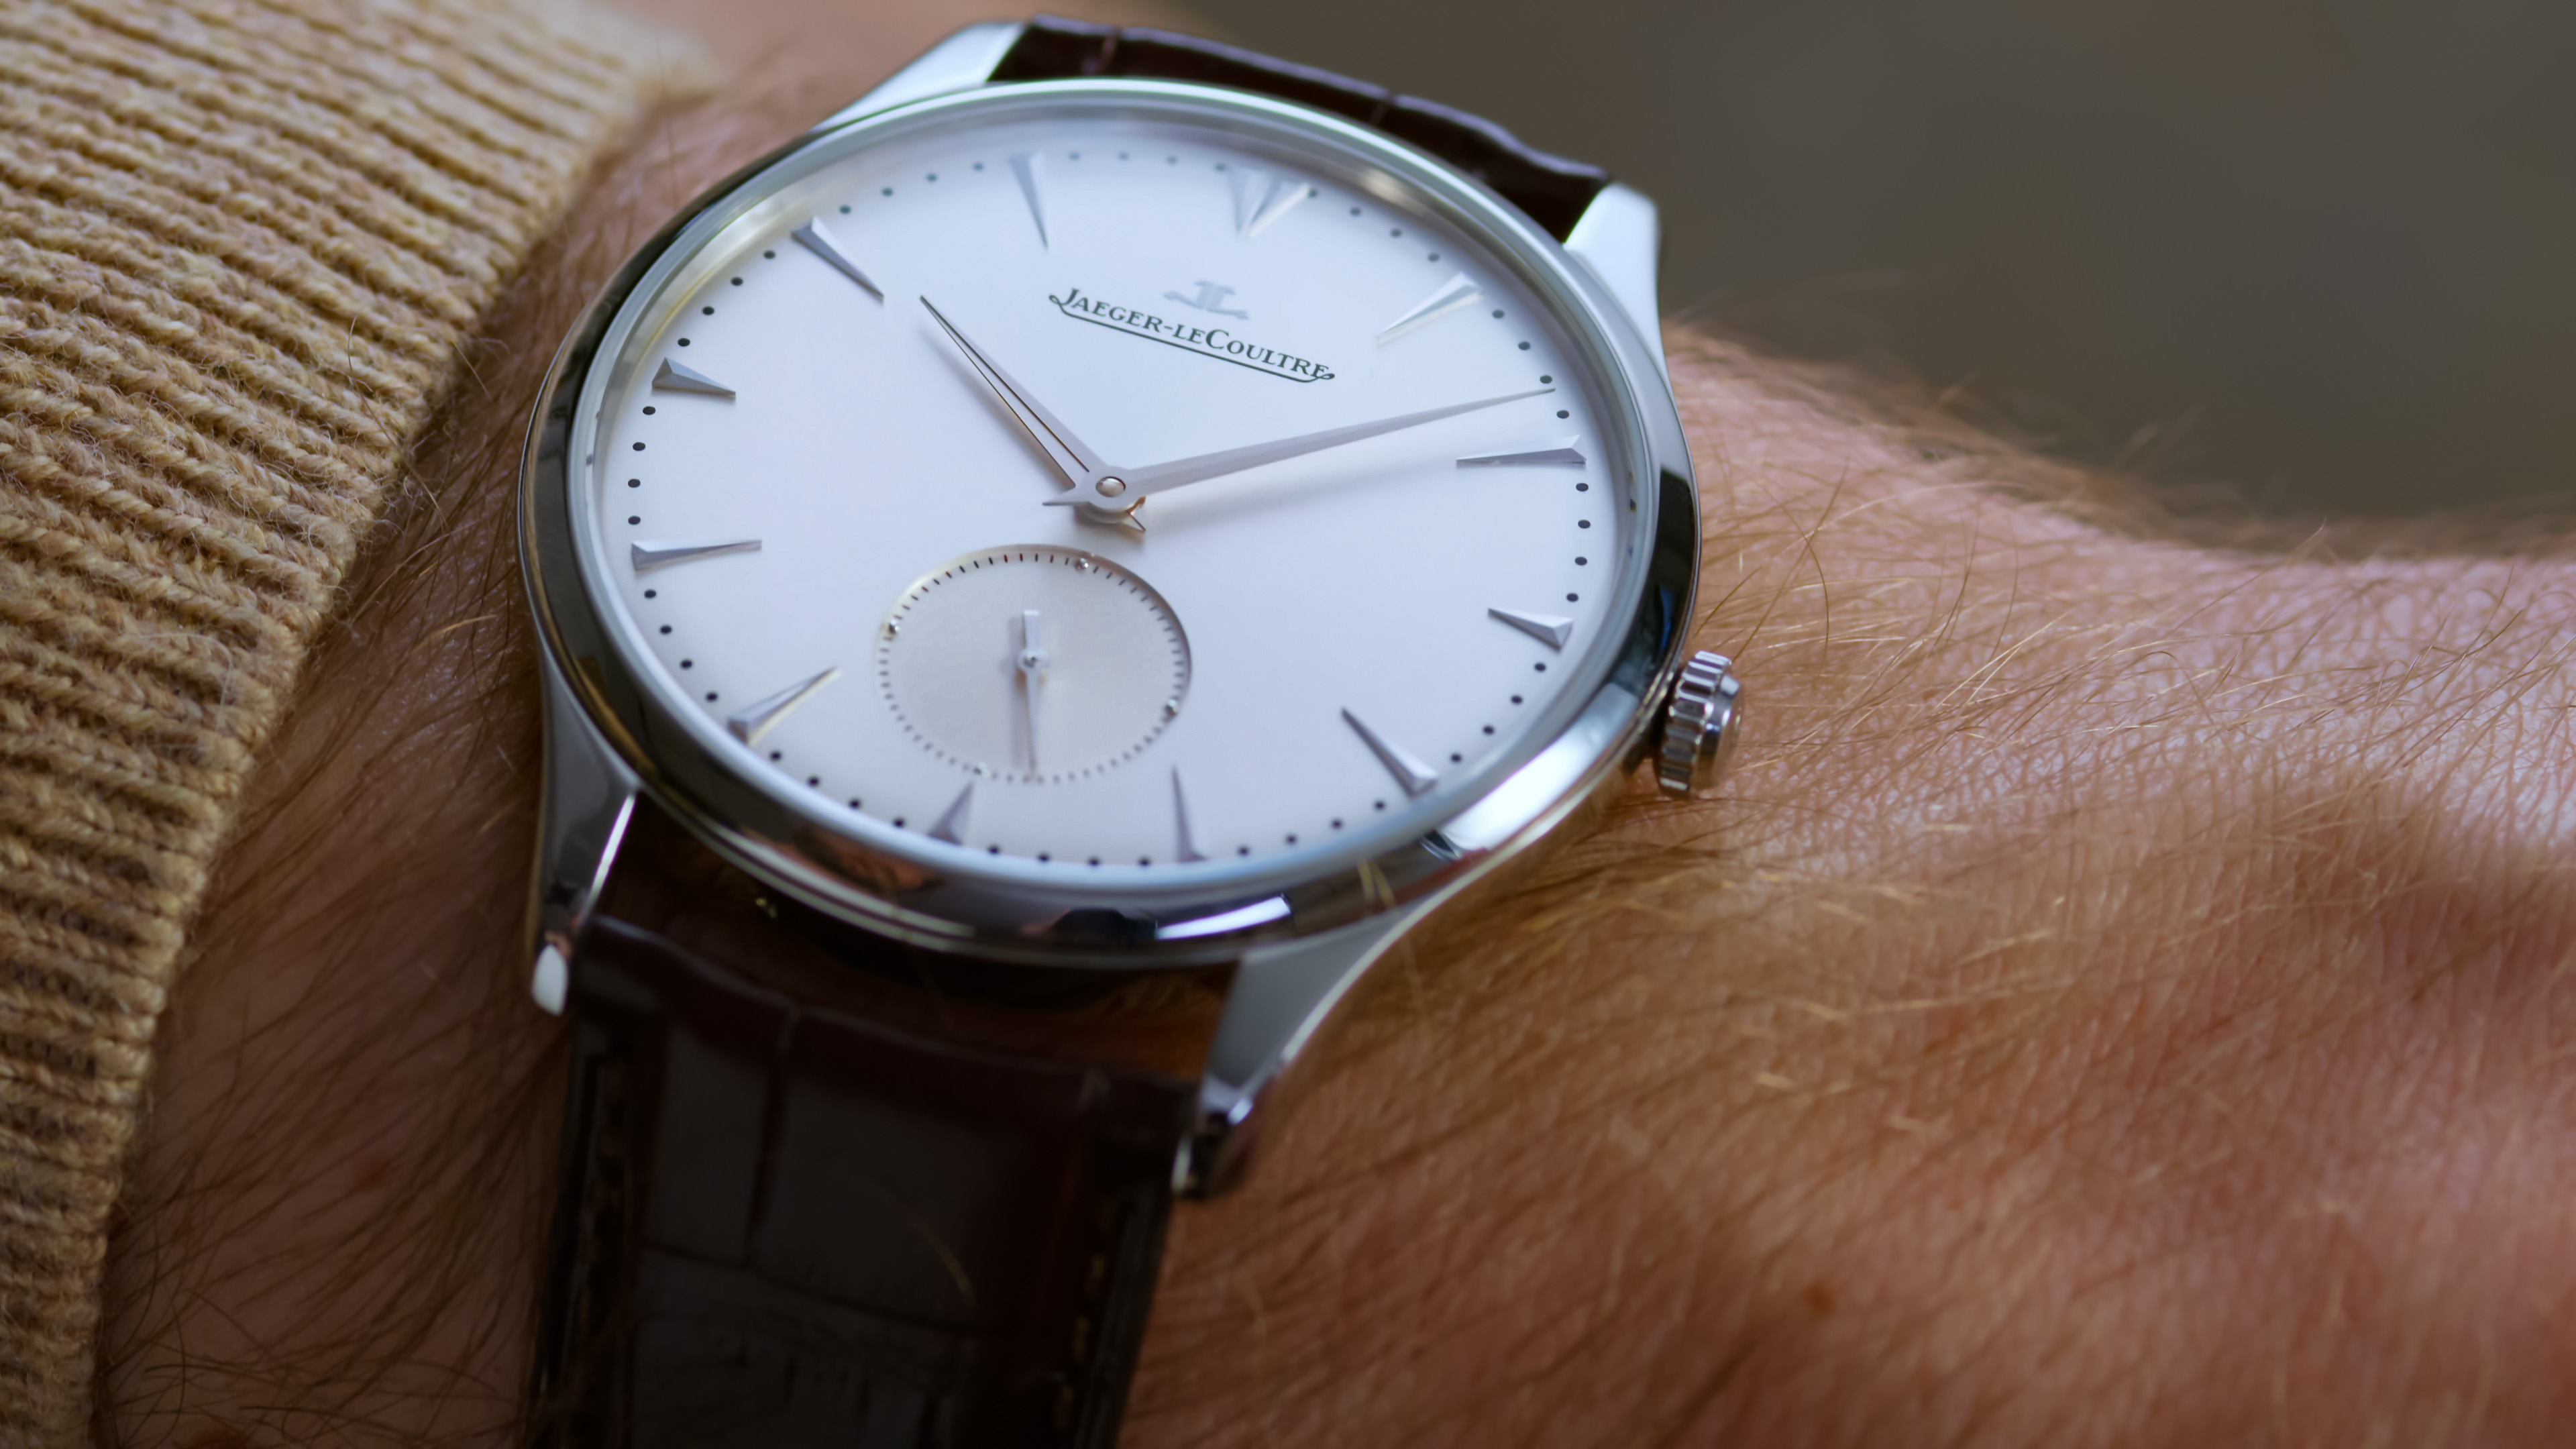 5 reasons why people should wear watches